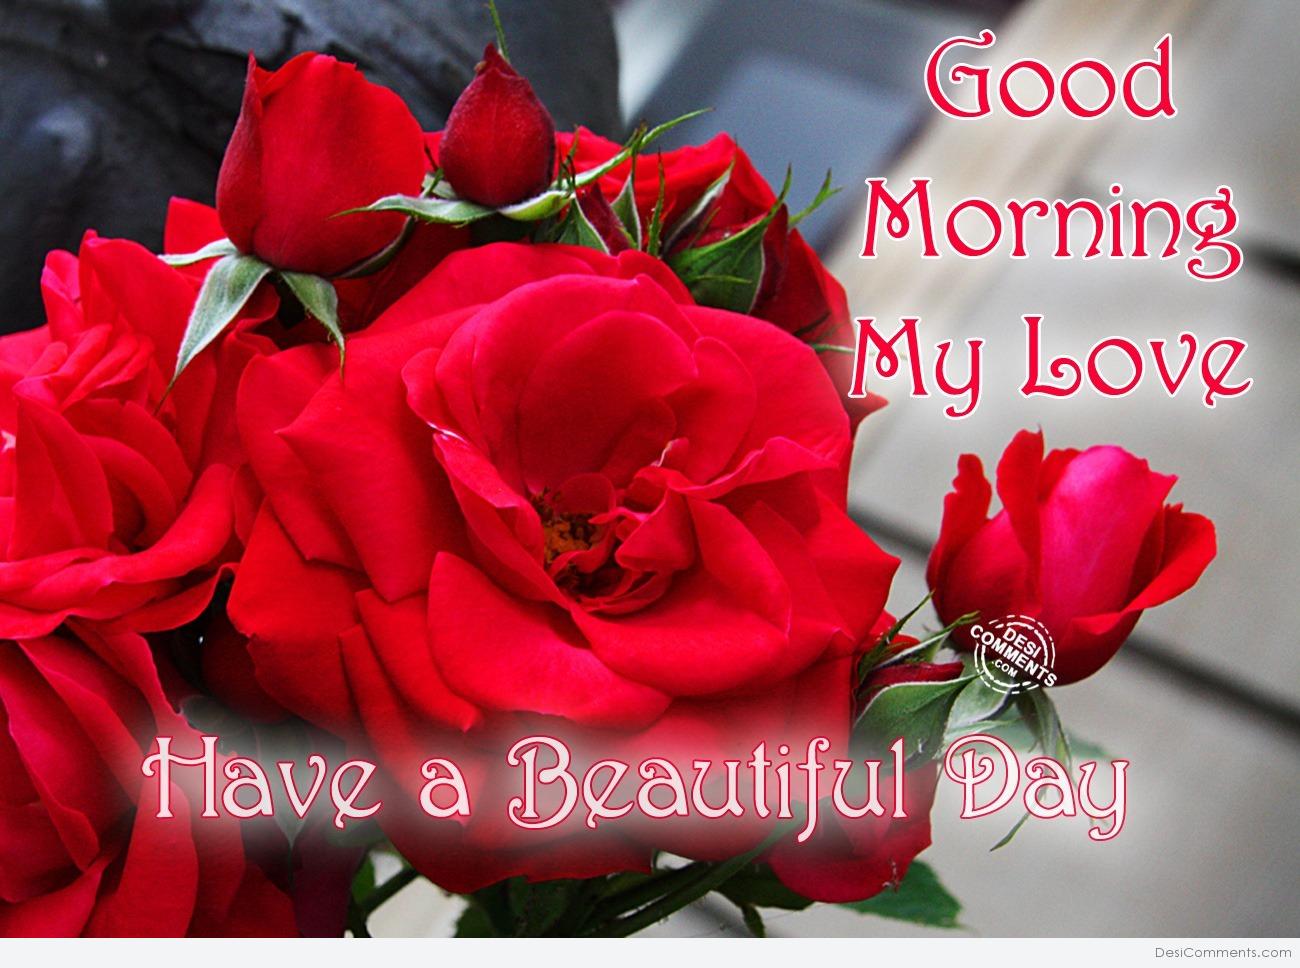 Good Morning with Roses - DesiComments.com